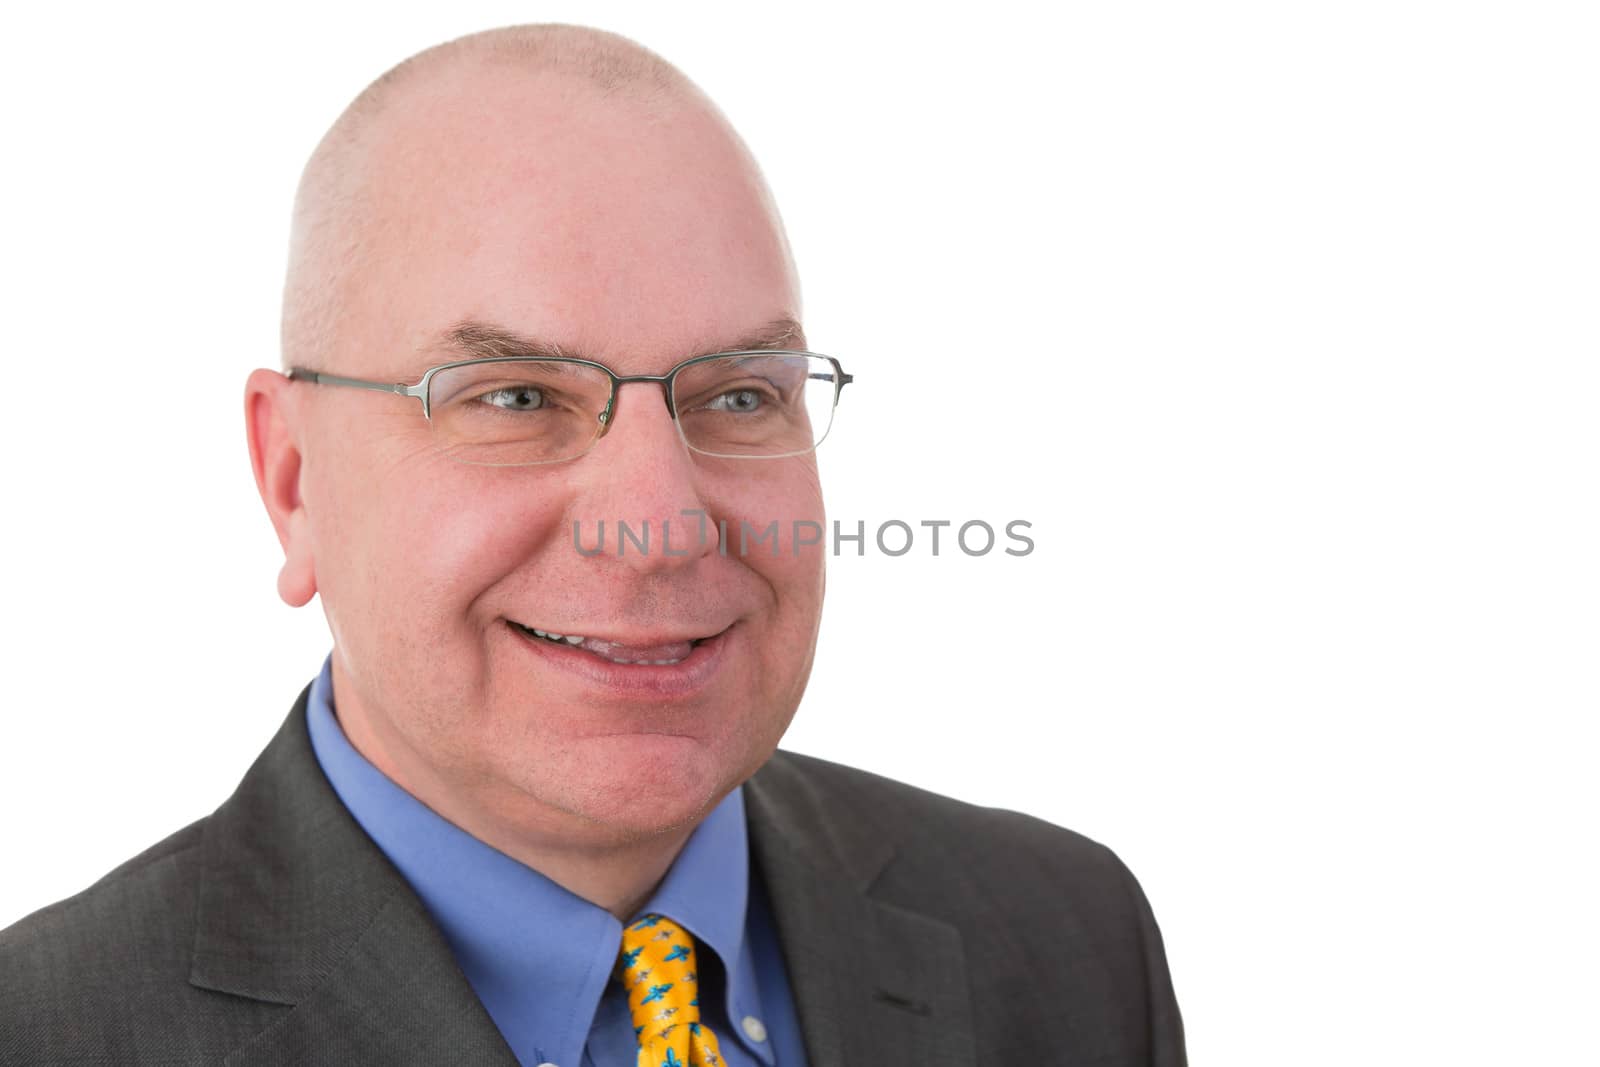 Smiling complacent businessman pleased with his achievements looking to the side with a self-satisfied smile,head and shoulders portrait on white